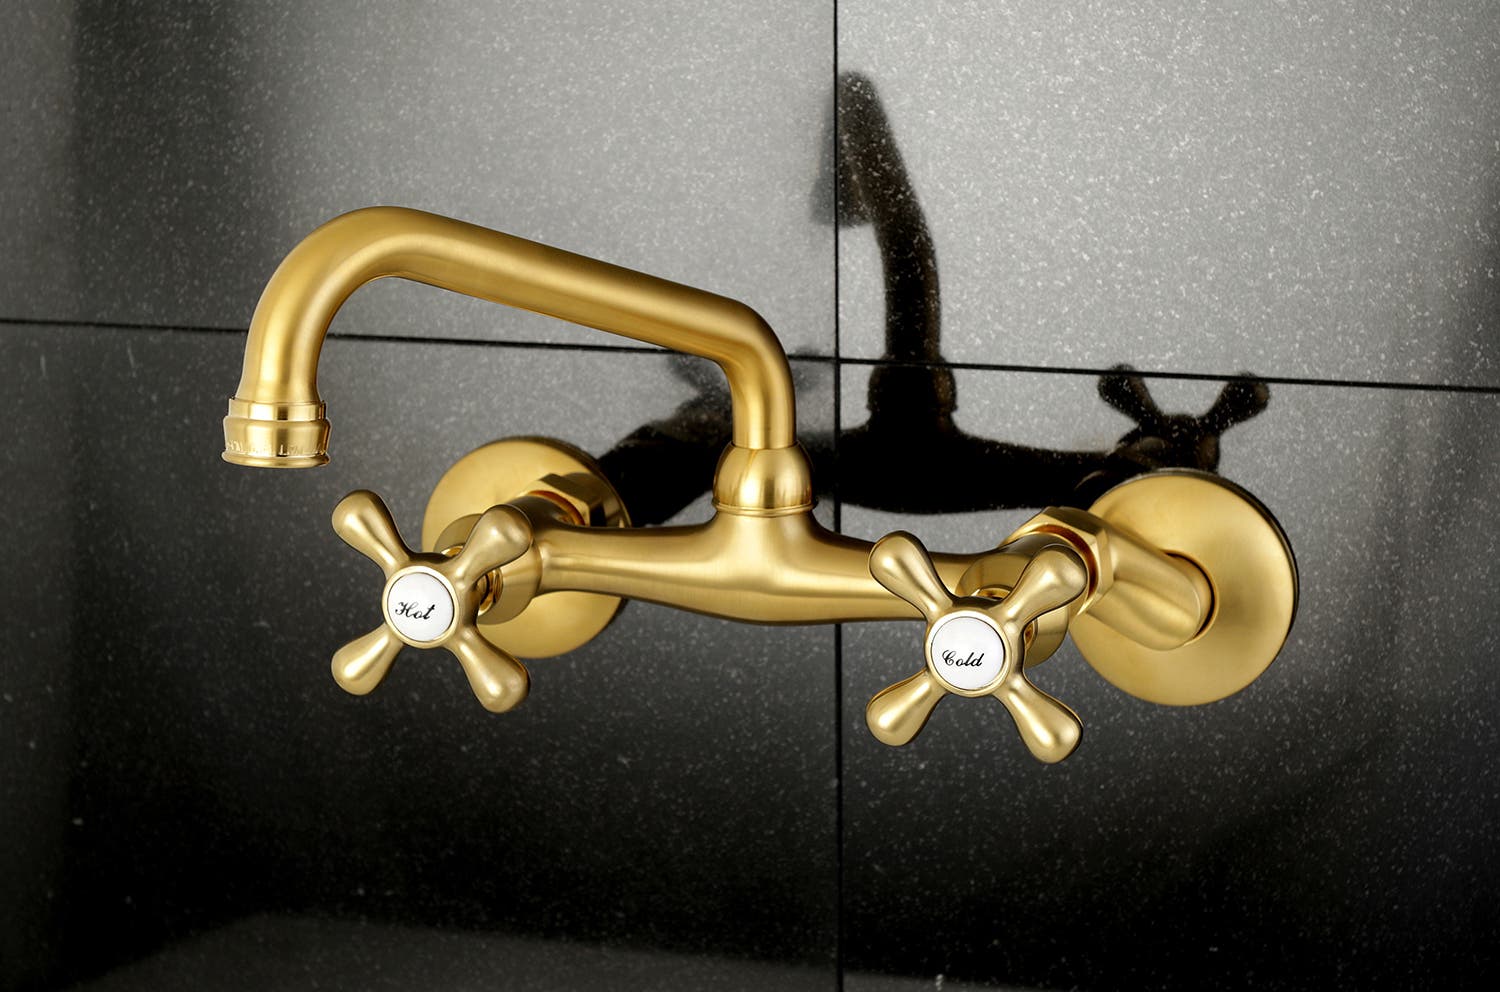 LOOKBOOK: Wall Mount Faucets Provide Beauty and Purpose for your Home